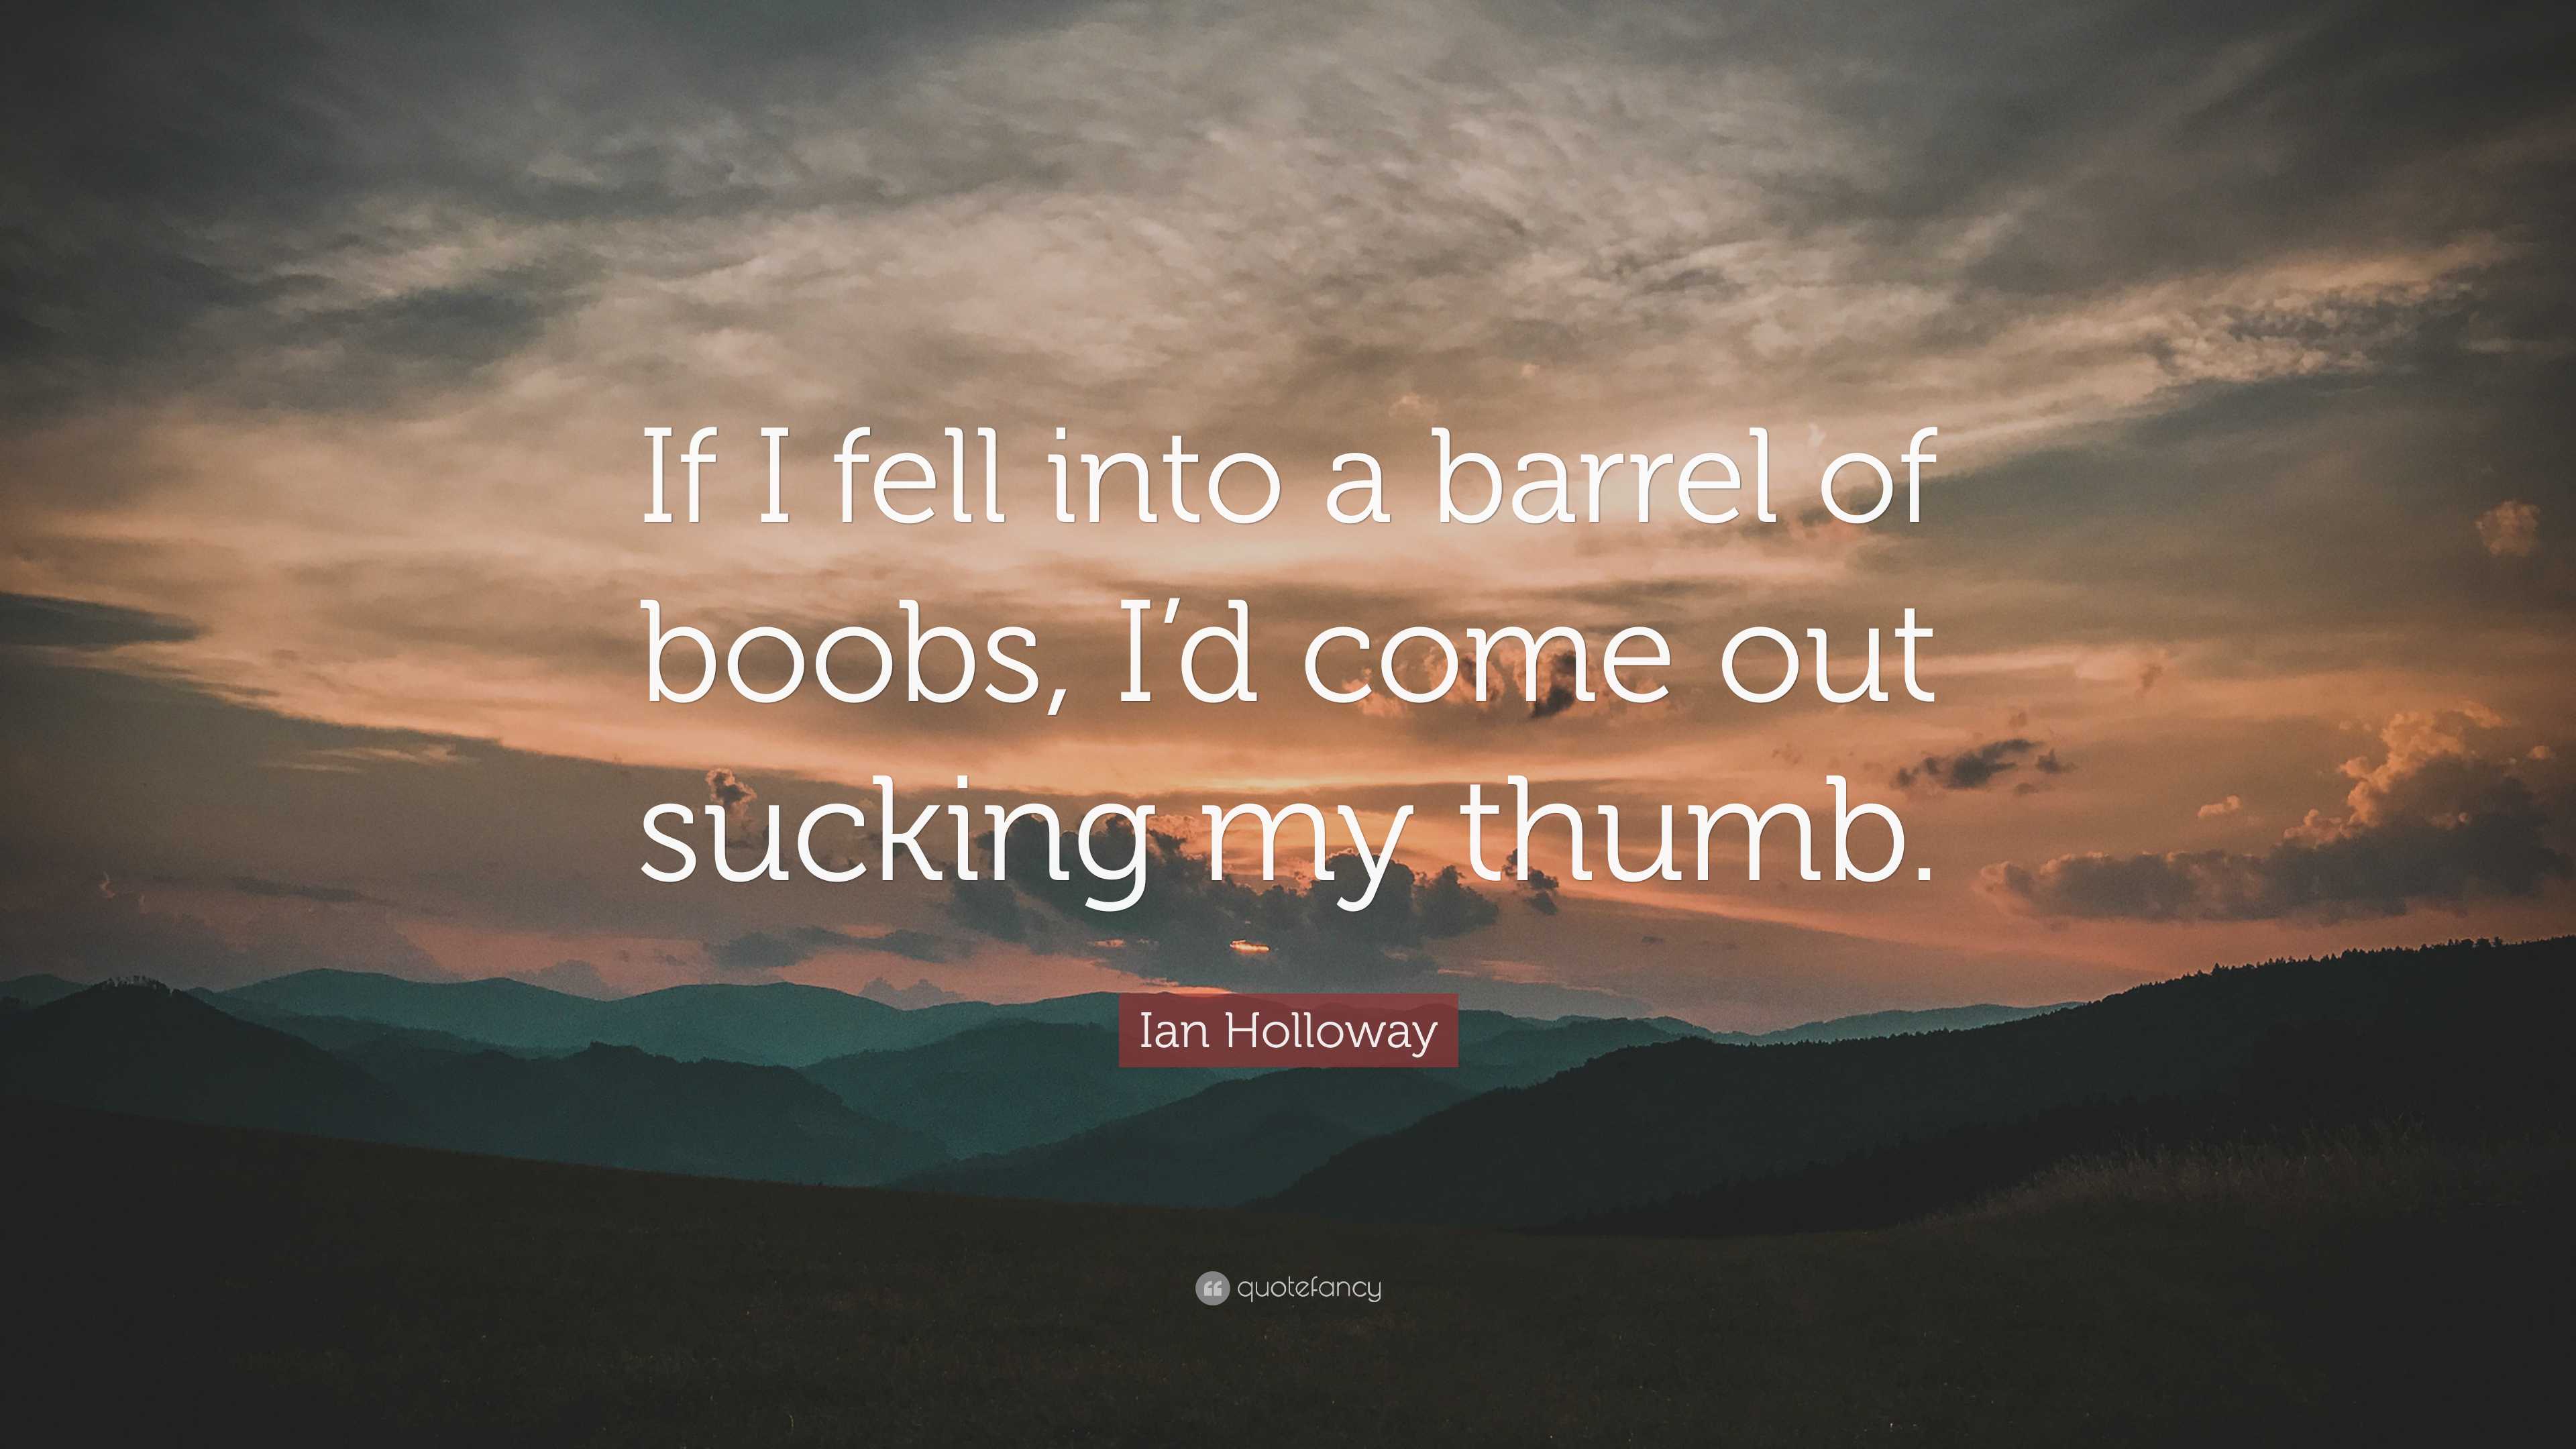 https://quotefancy.com/media/wallpaper/3840x2160/7918247-Ian-Holloway-Quote-If-I-fell-into-a-barrel-of-boobs-I-d-come-out.jpg